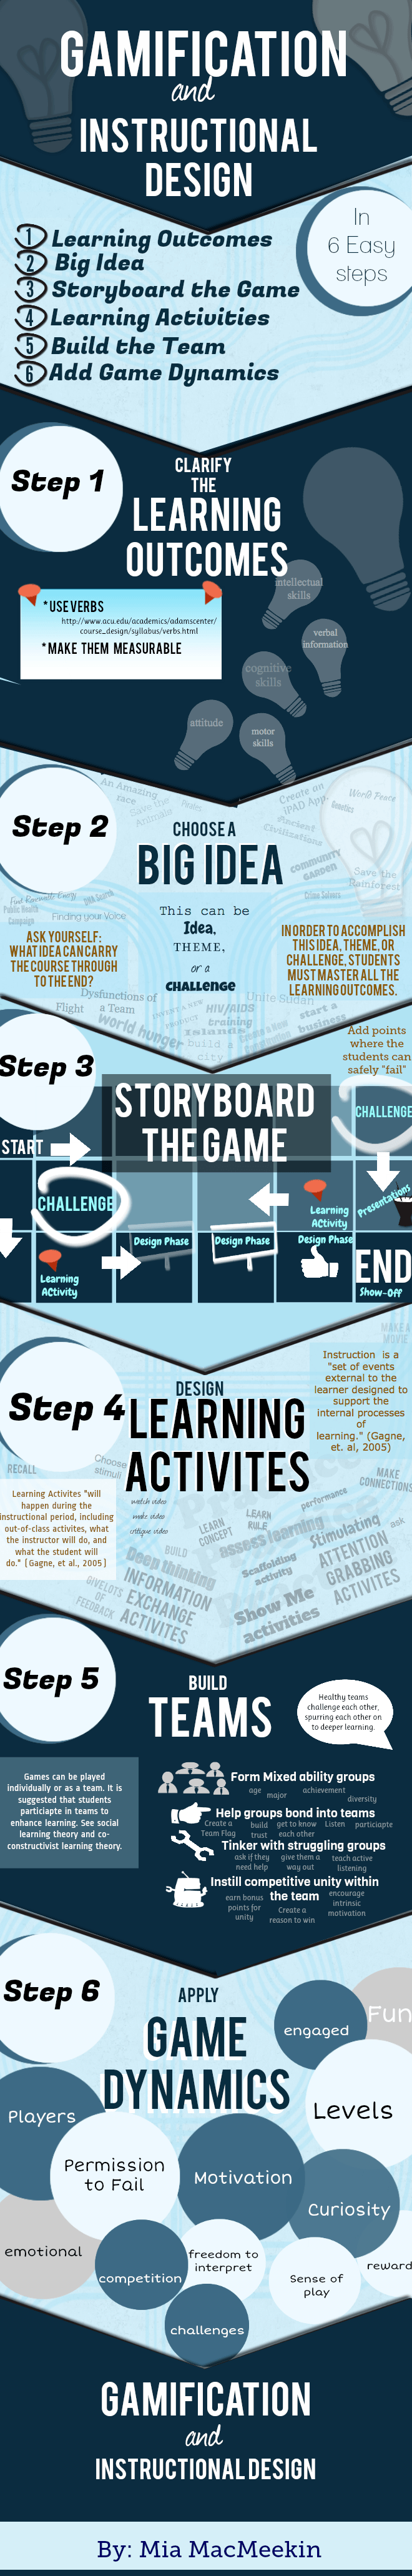 Gamification and Instructional Design thumbnail